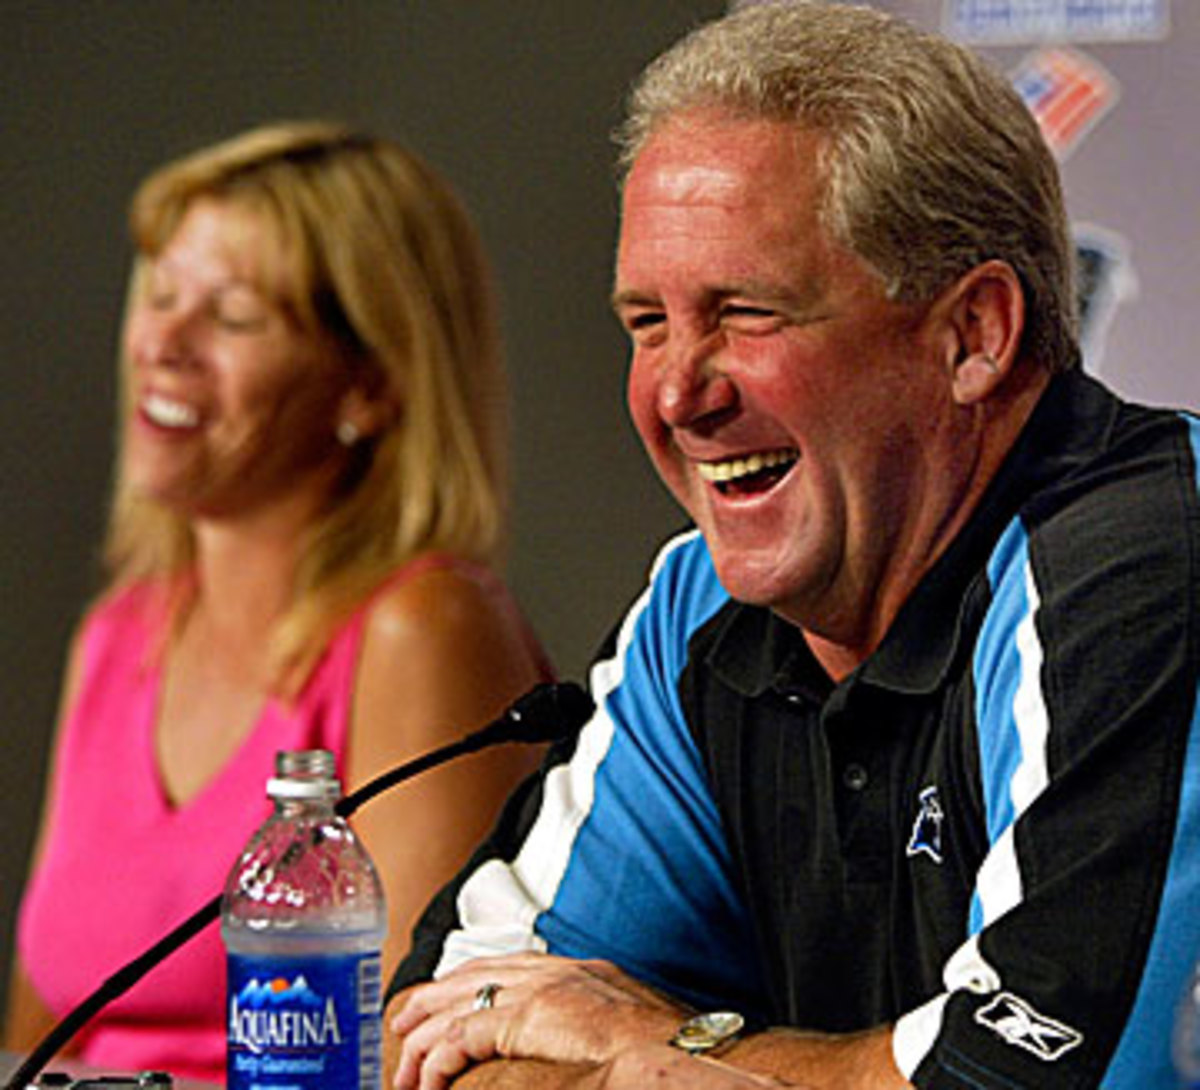 John and Robin Fox share a laugh from John's time as head coach of the Panthers. (Chuck Burton/AP)